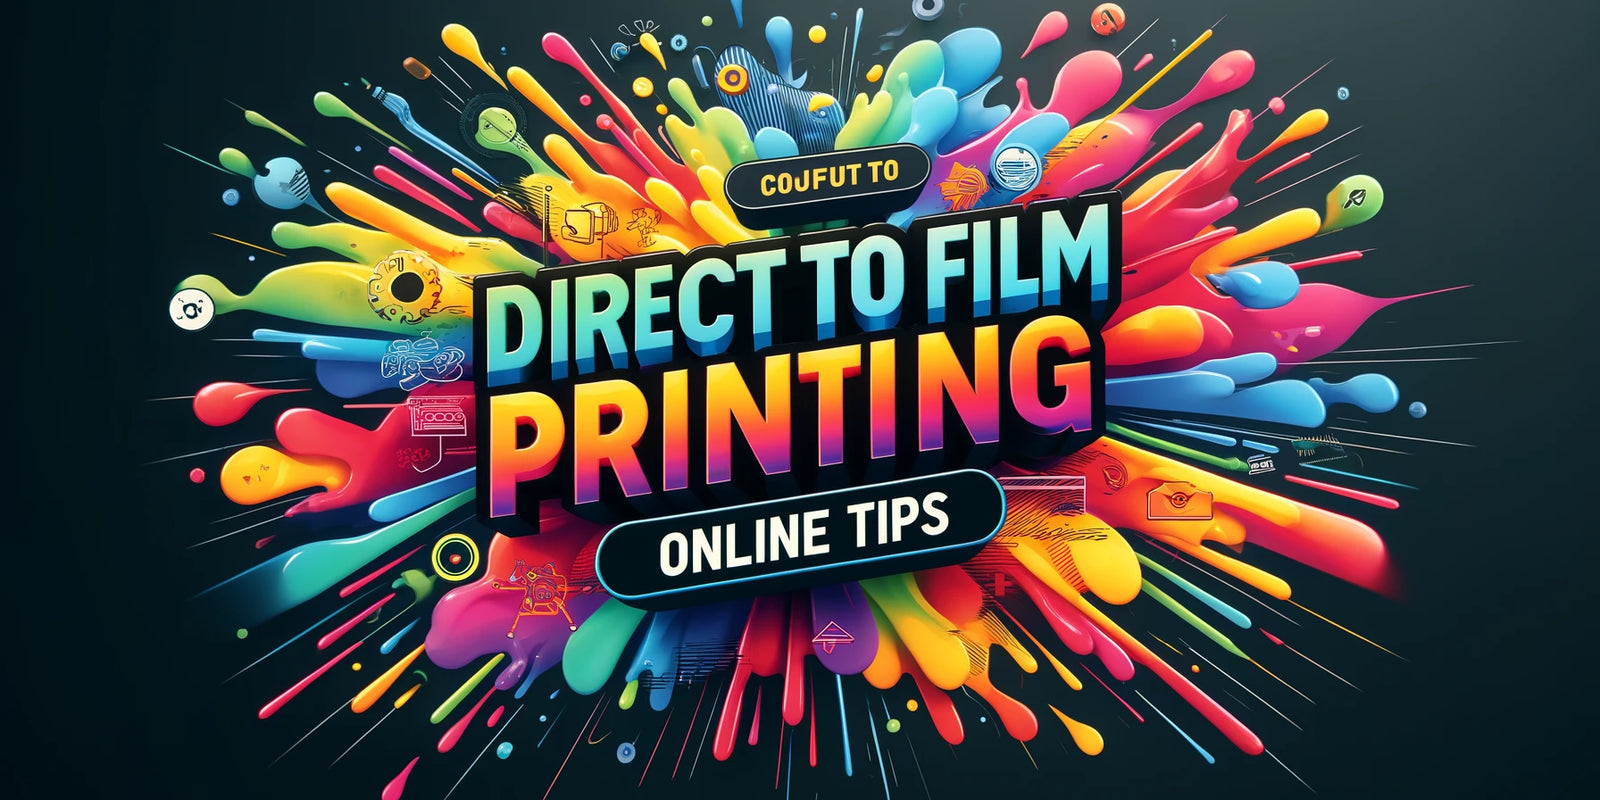 Tips for Buying Direct to Film Printing Online